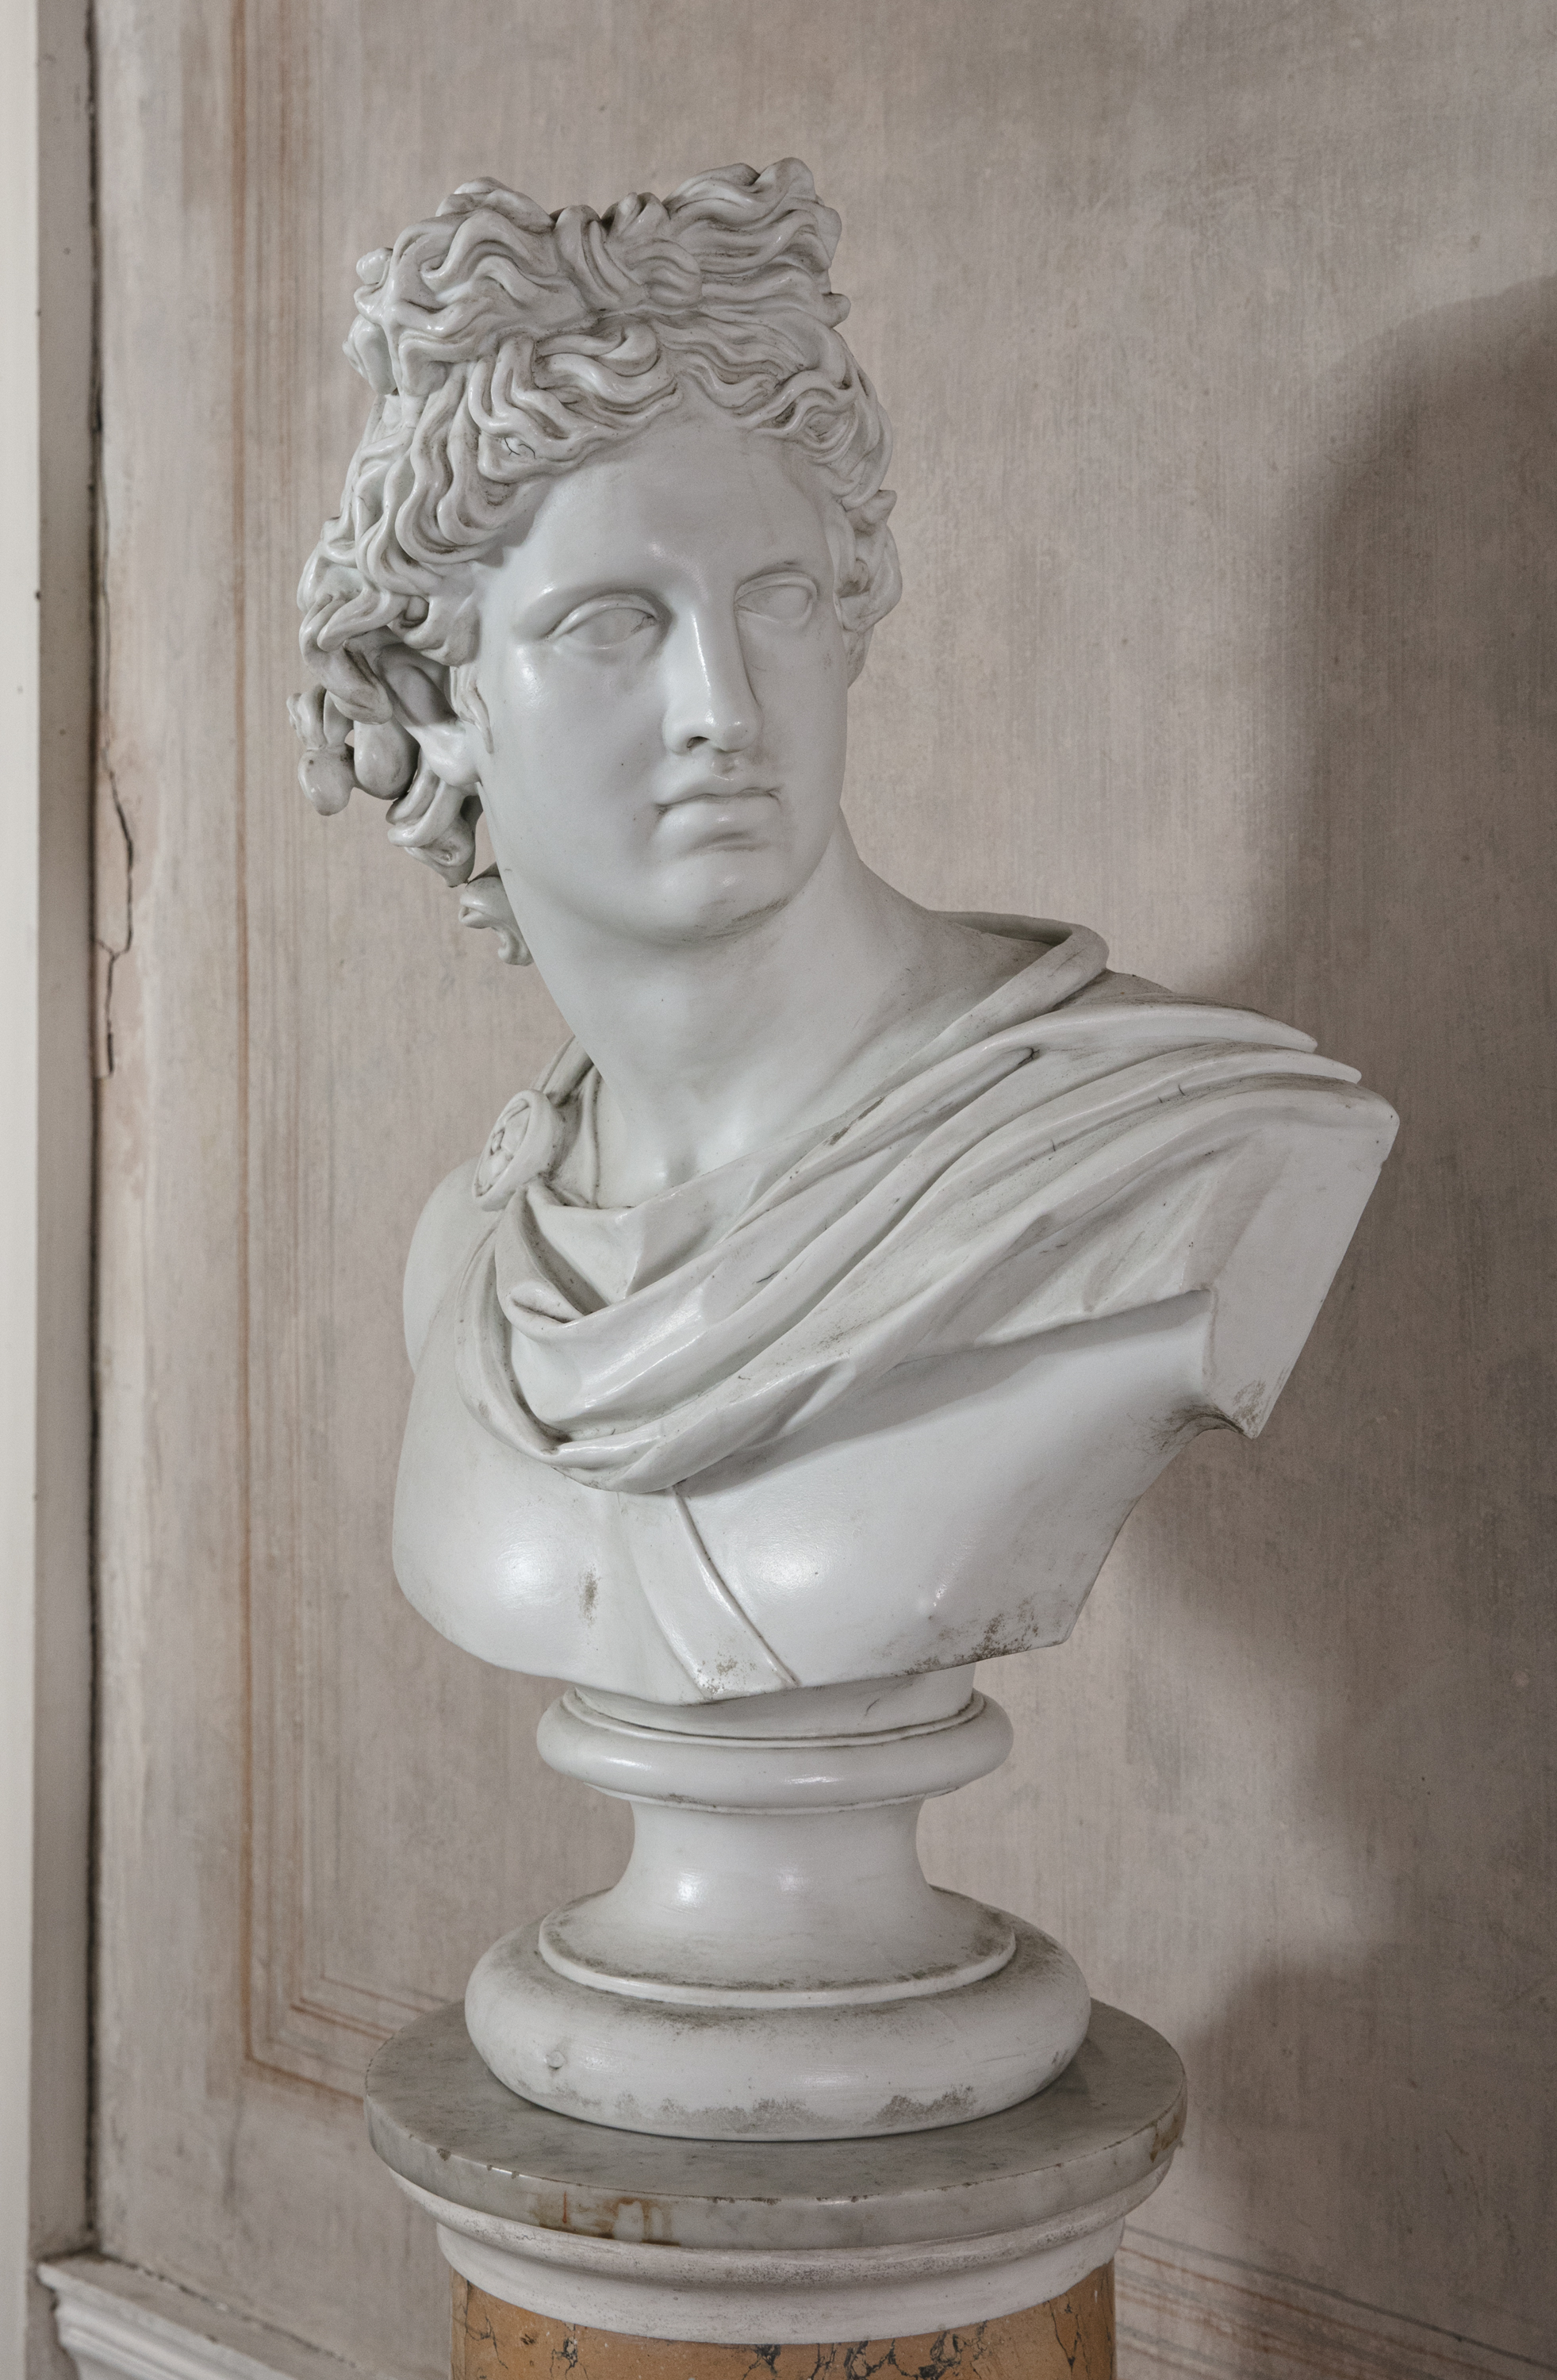 FOUR 19TH CENTURY POLISHED PLASTER CLASSICAL BUSTS AFTER THE ANTIQUE Provenance: Collection of the - Image 4 of 4